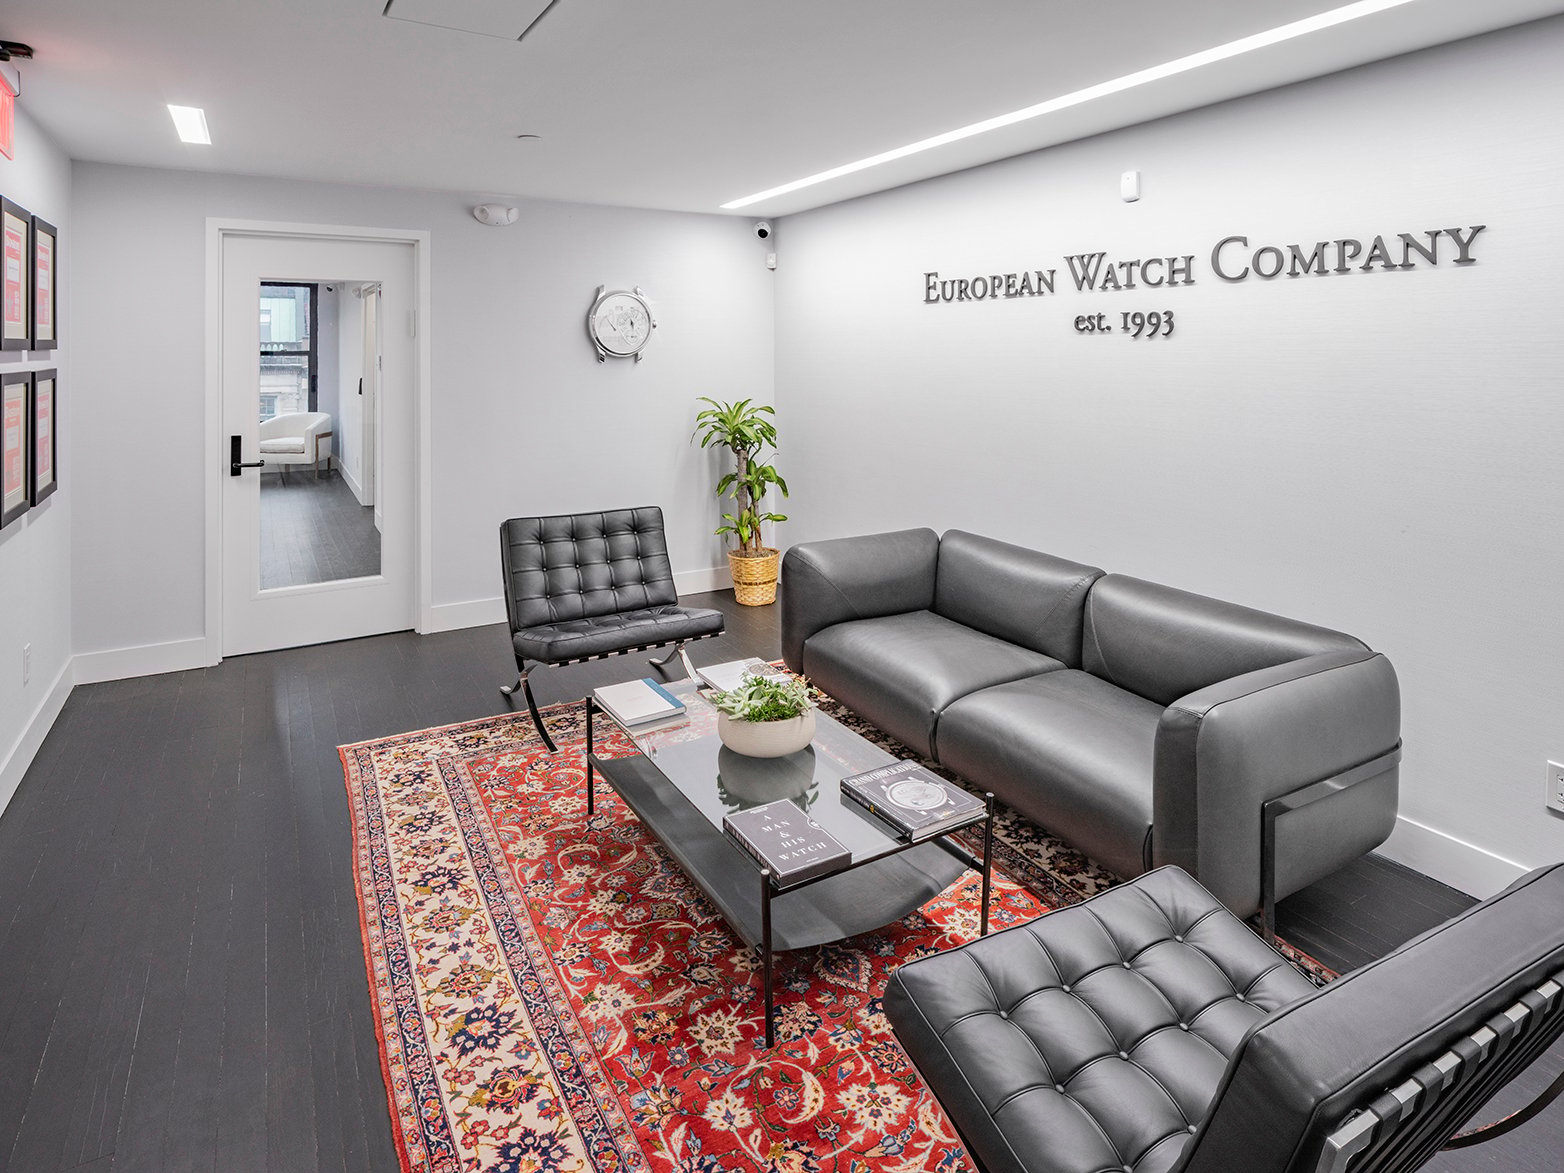 Interior of European Watch Company, lounge area, 3 love seats, oriental area rug with glass coffee table with  plants, books, with "European Watch Company est. 1993" on the wall behind center love seat, plants in the corner, angle shows clock, wall decor, and glass door as entrance